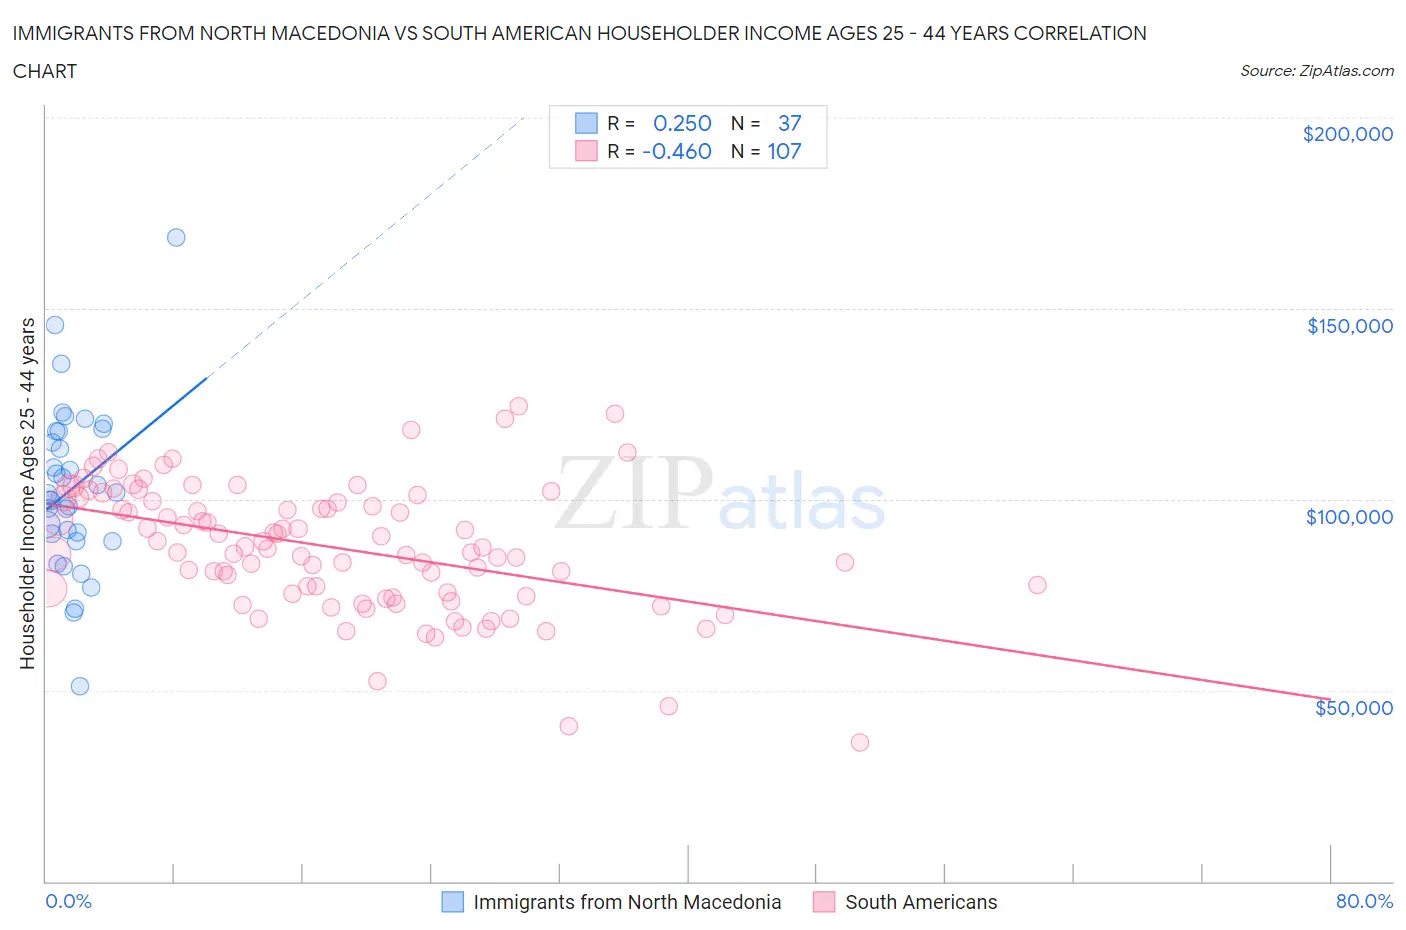 Immigrants from North Macedonia vs South American Householder Income Ages 25 - 44 years